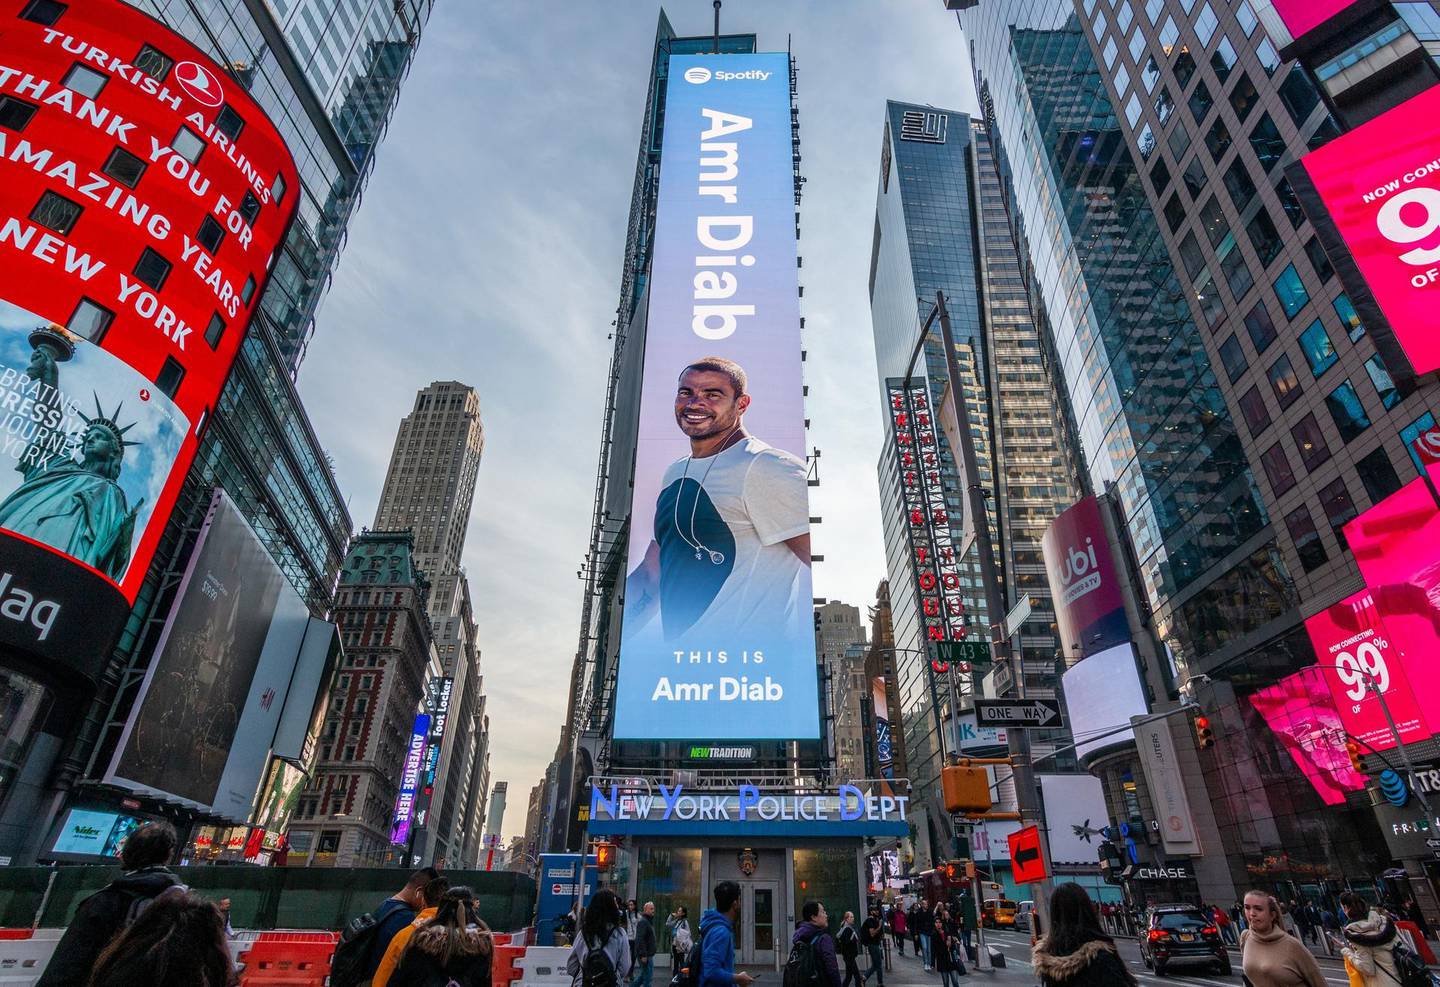 Amr Diab takes centre stage on a Times Square billboard. Courtesy Spotify